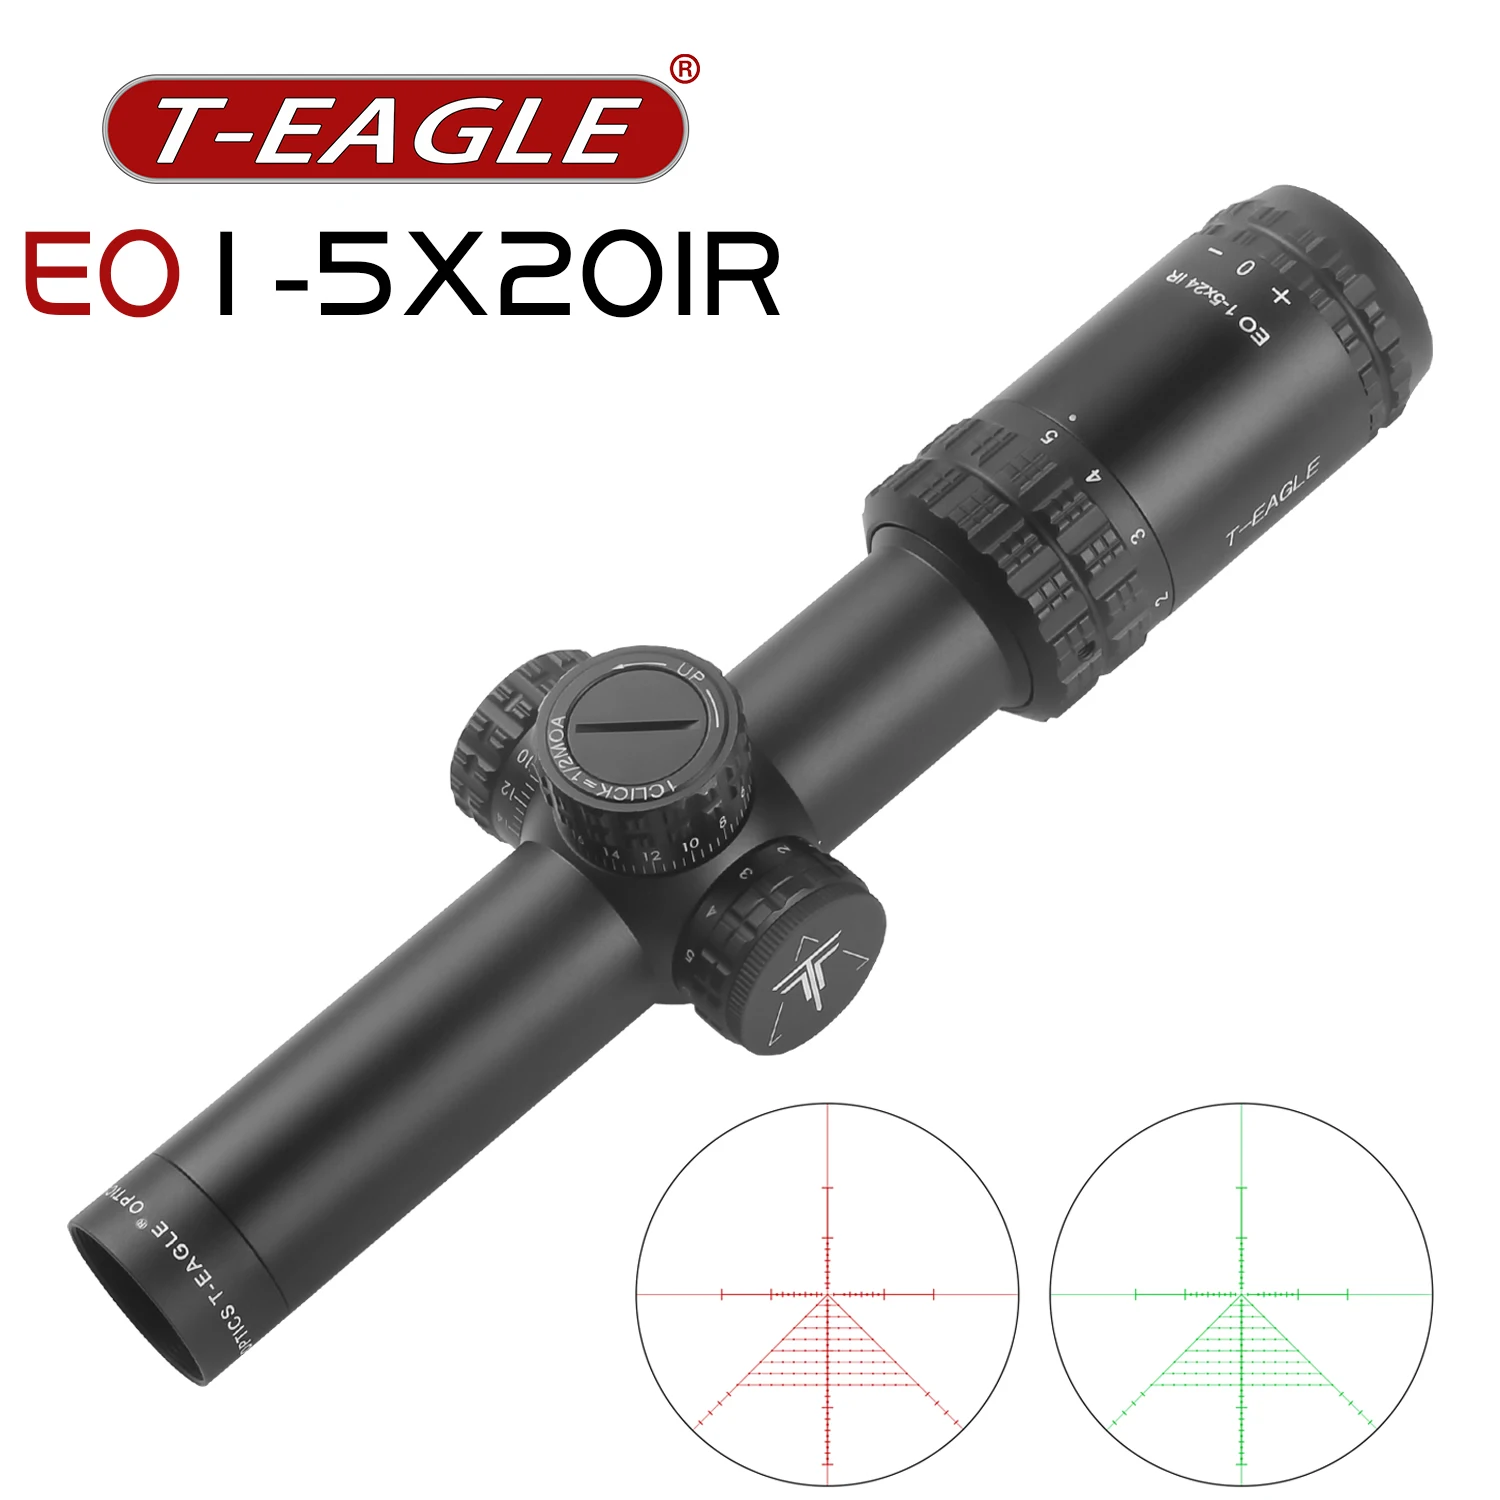 

T-EAGLE EO 1-5X20 IR Tactical Riflescope Hunting Spotting Rifle Scope Optical Collimator Air Gun Airsoft PCP Sight for Hunting